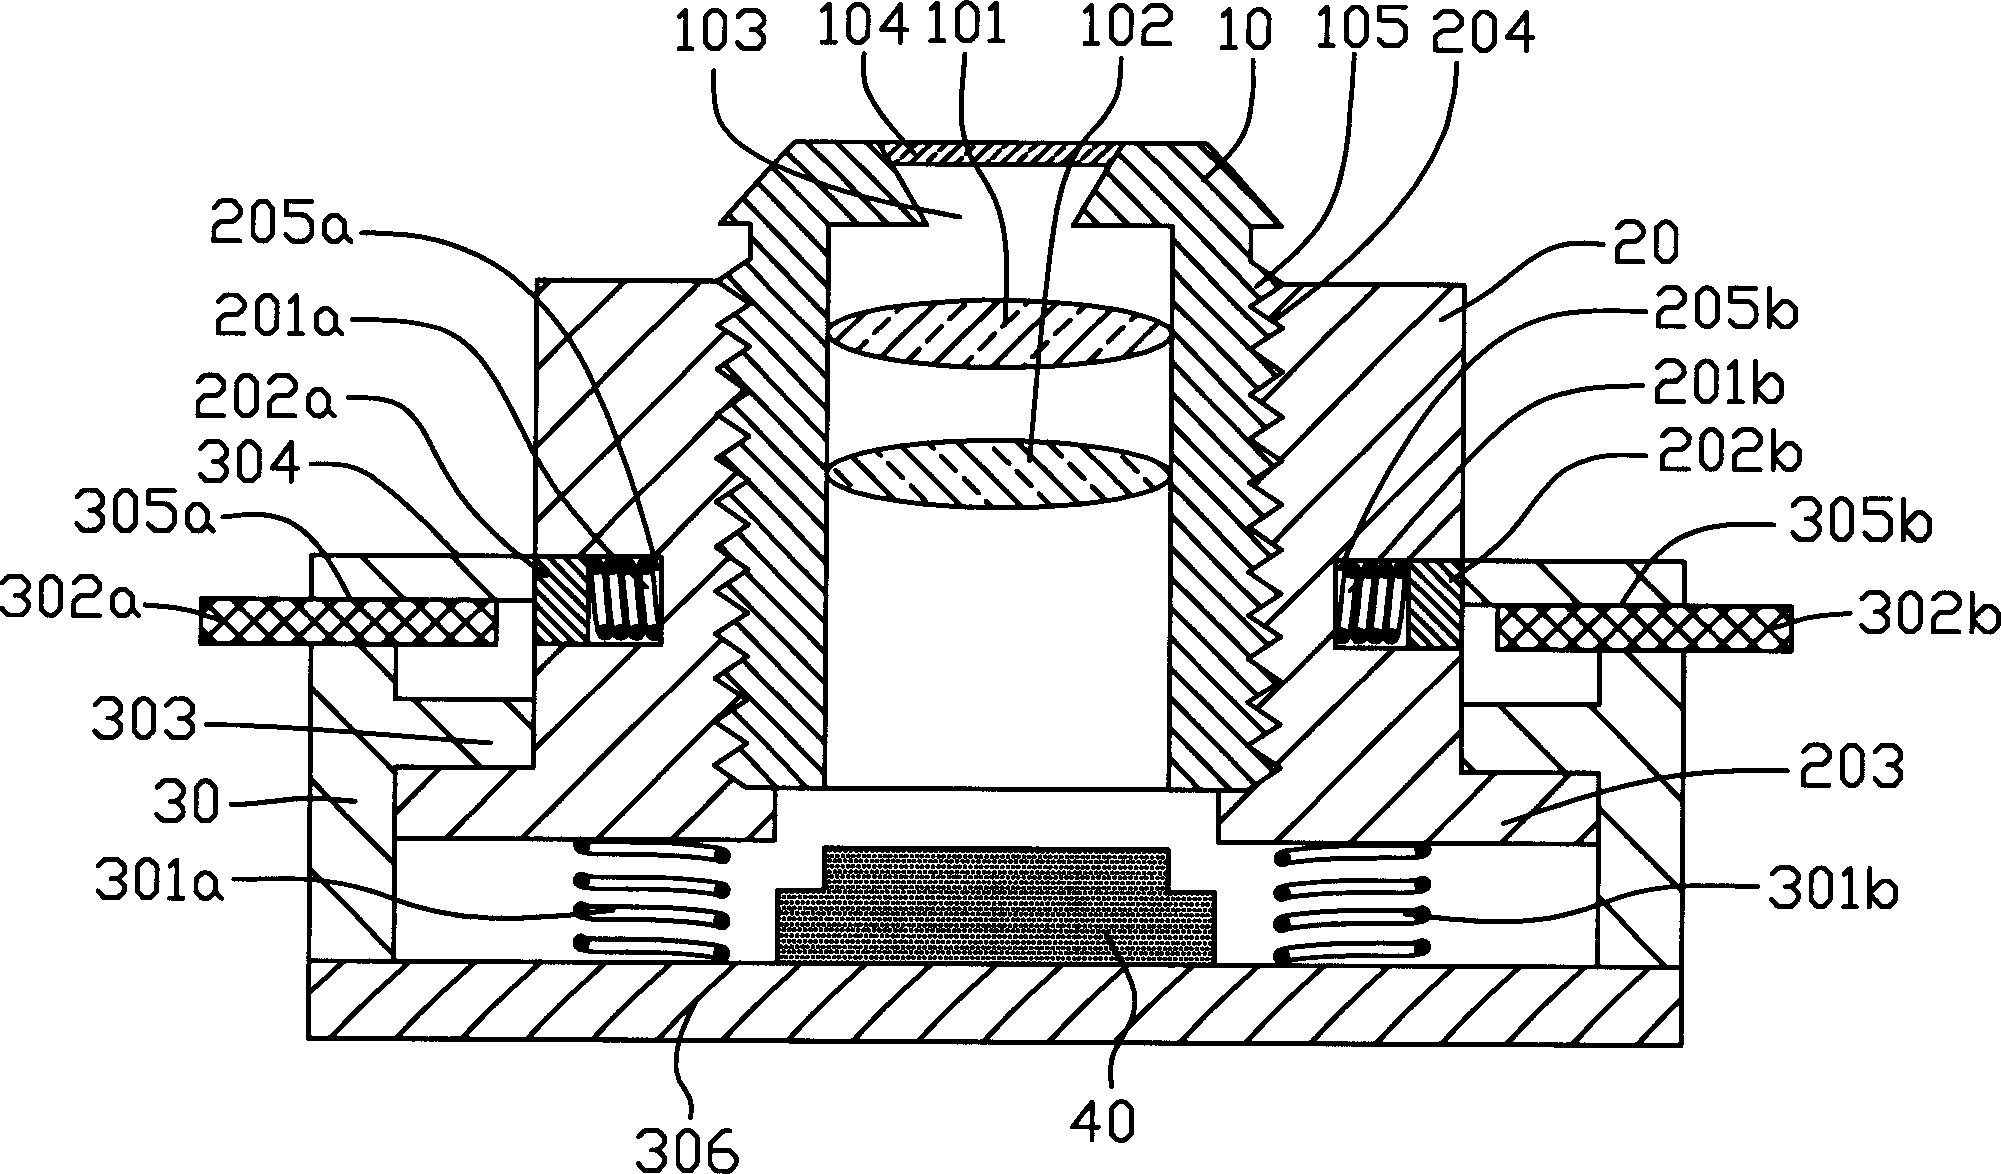 Two section type focusing mechanism